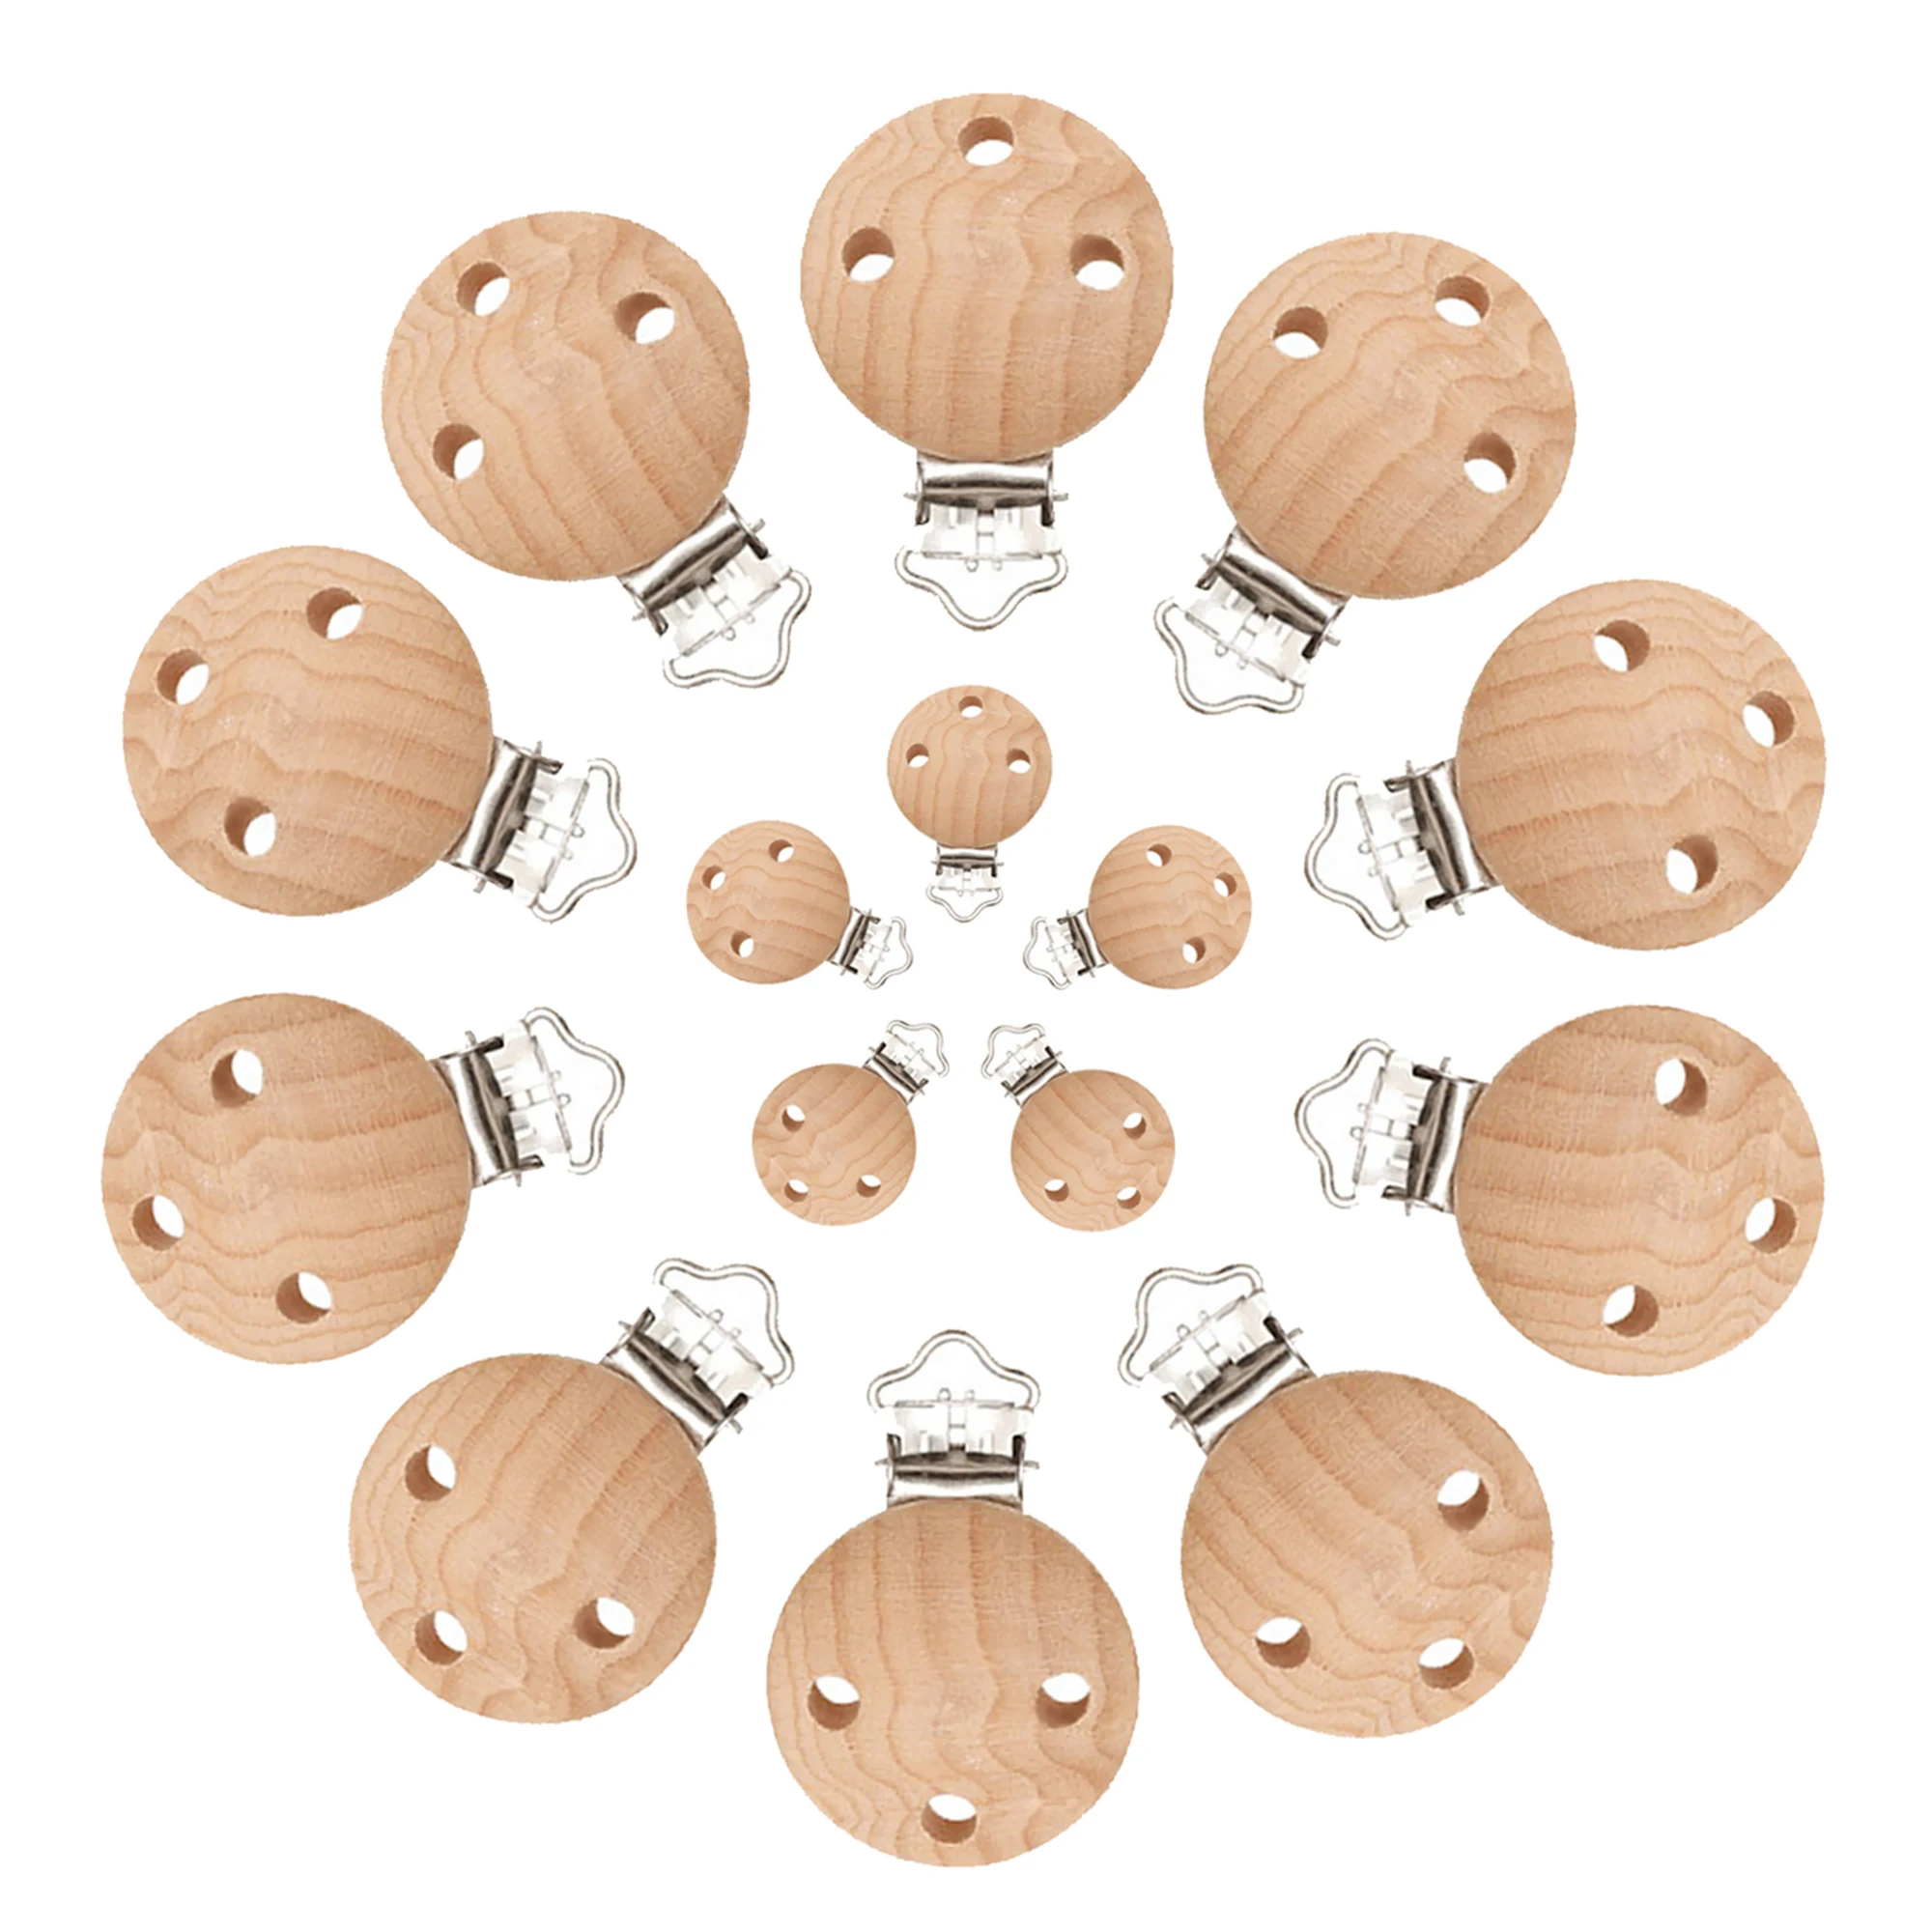 Mabochewing 50pcs 30mm 35mm Round Hard Beech Wood Clips Baby Teething Pacifier Dummy Chain Holder Infant Mobile Clip Making